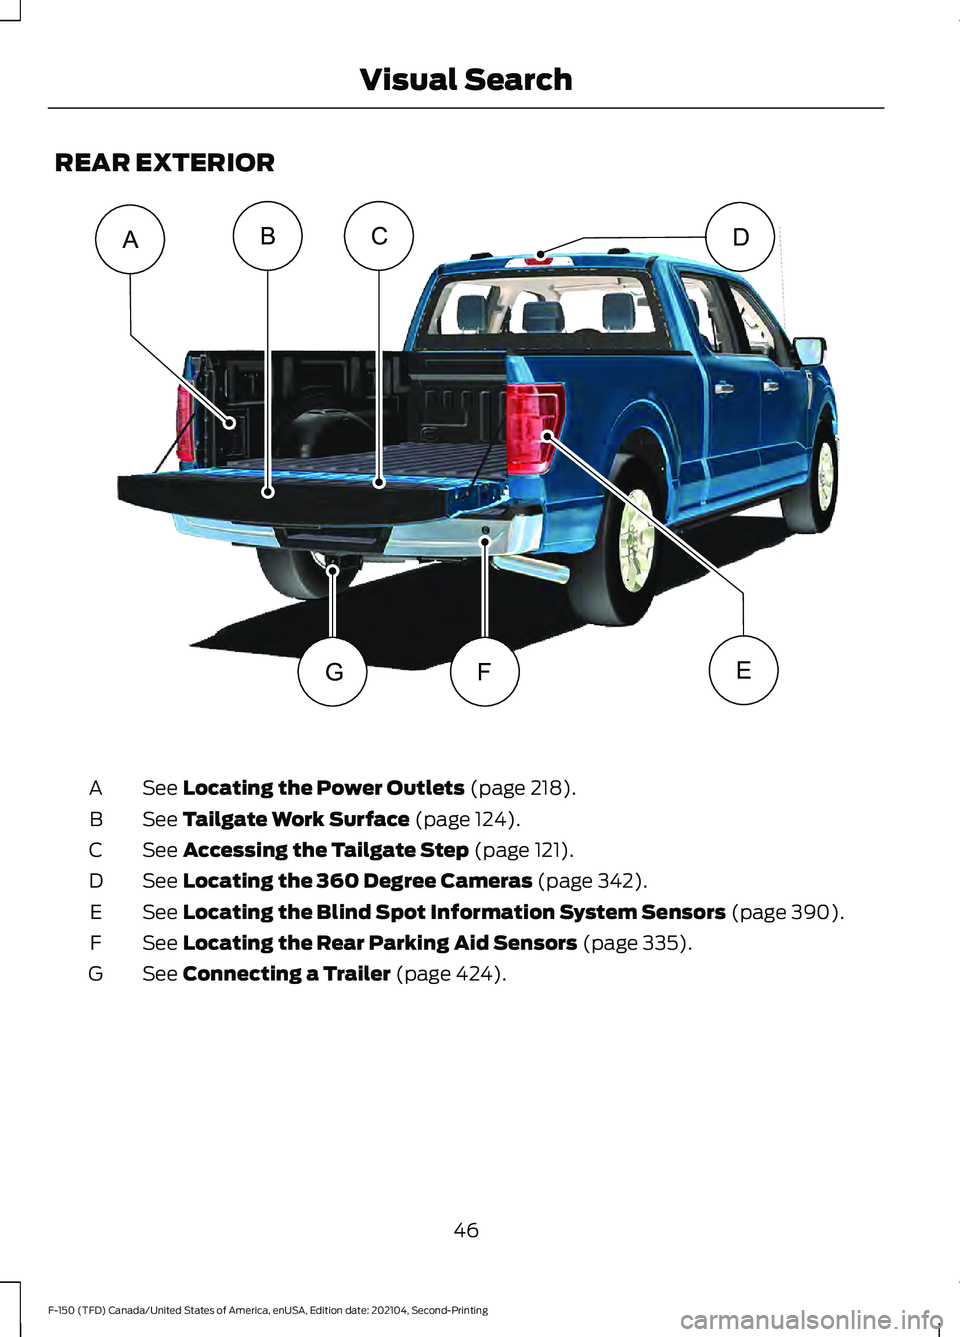 FORD F-150 2021  Owners Manual REAR EXTERIOR
See Locating the Power Outlets (page 218).
A
See 
Tailgate Work Surface (page 124).
B
See 
Accessing the Tailgate Step (page 121).
C
See 
Locating the 360 Degree Cameras (page 342).
D
Se